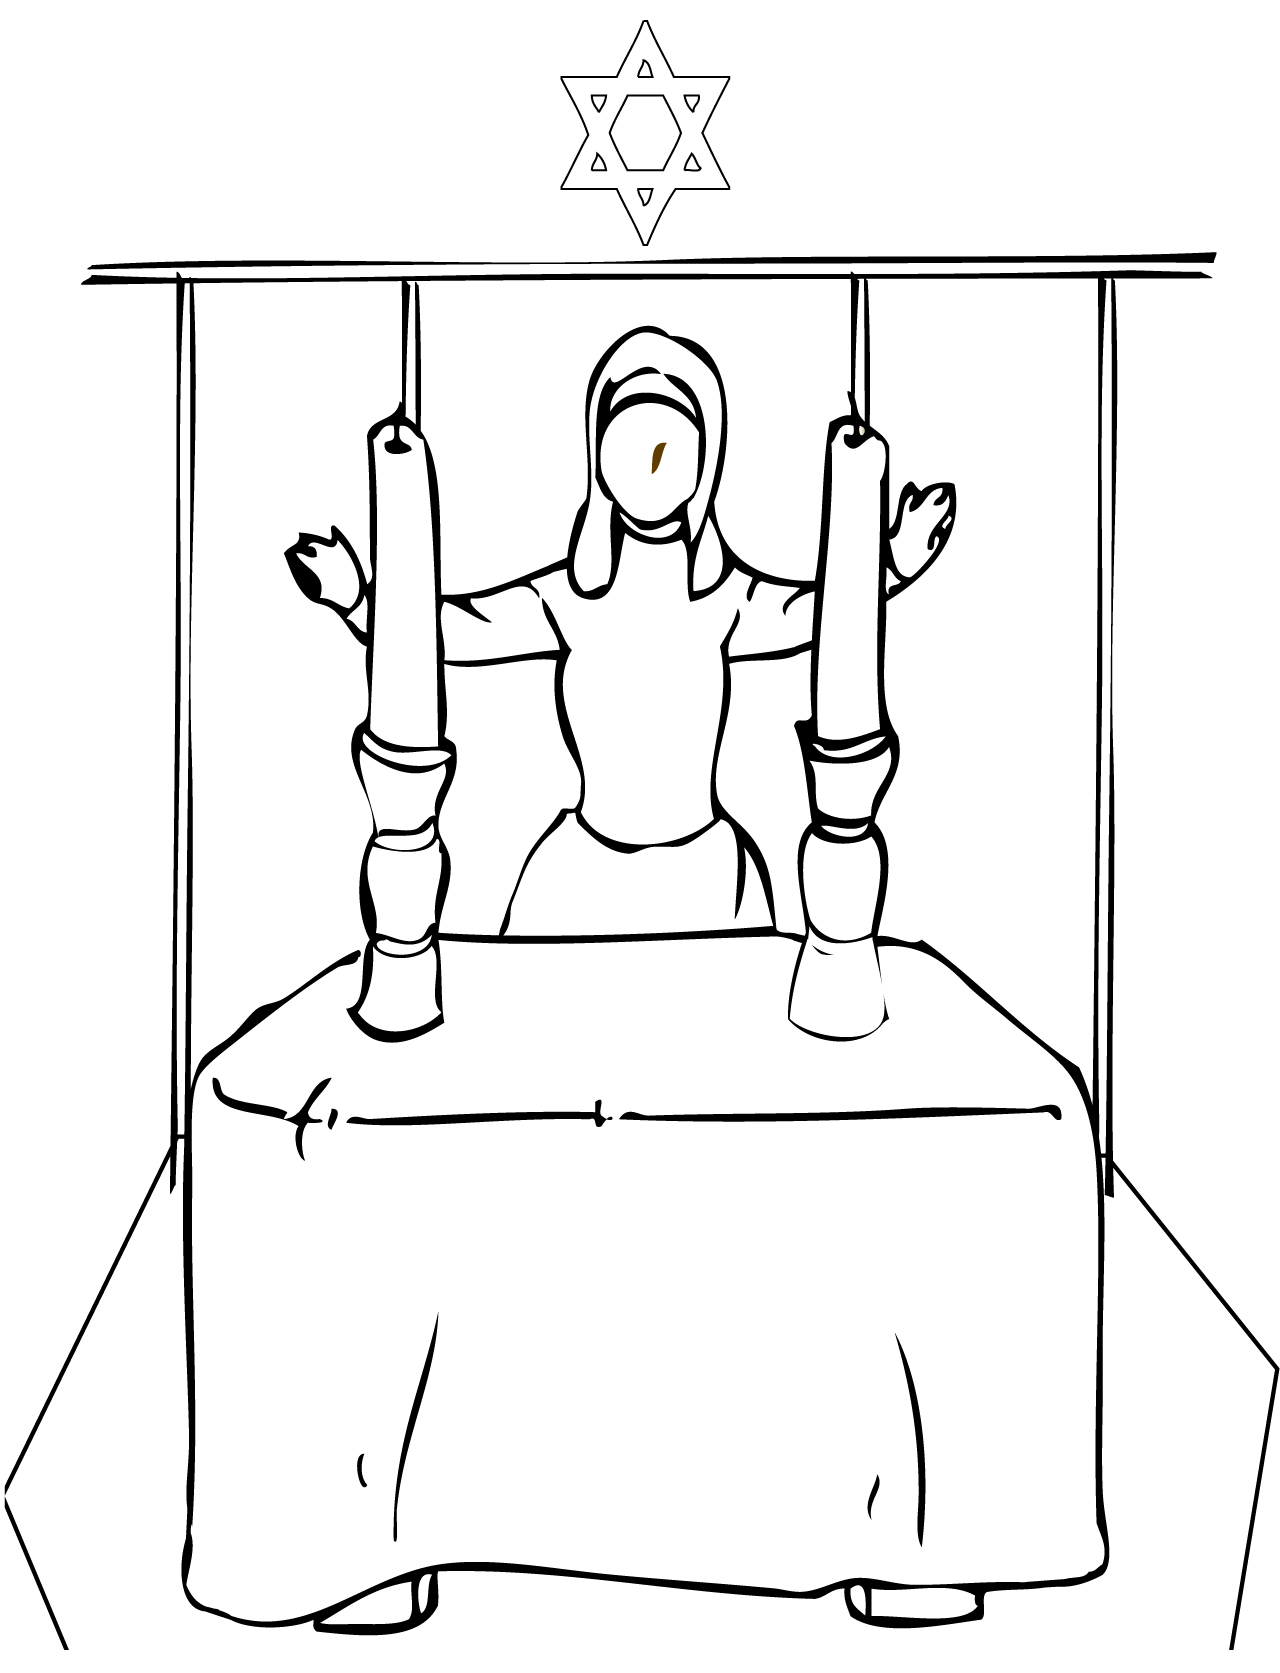 sabbath day coloring pages - photo #25